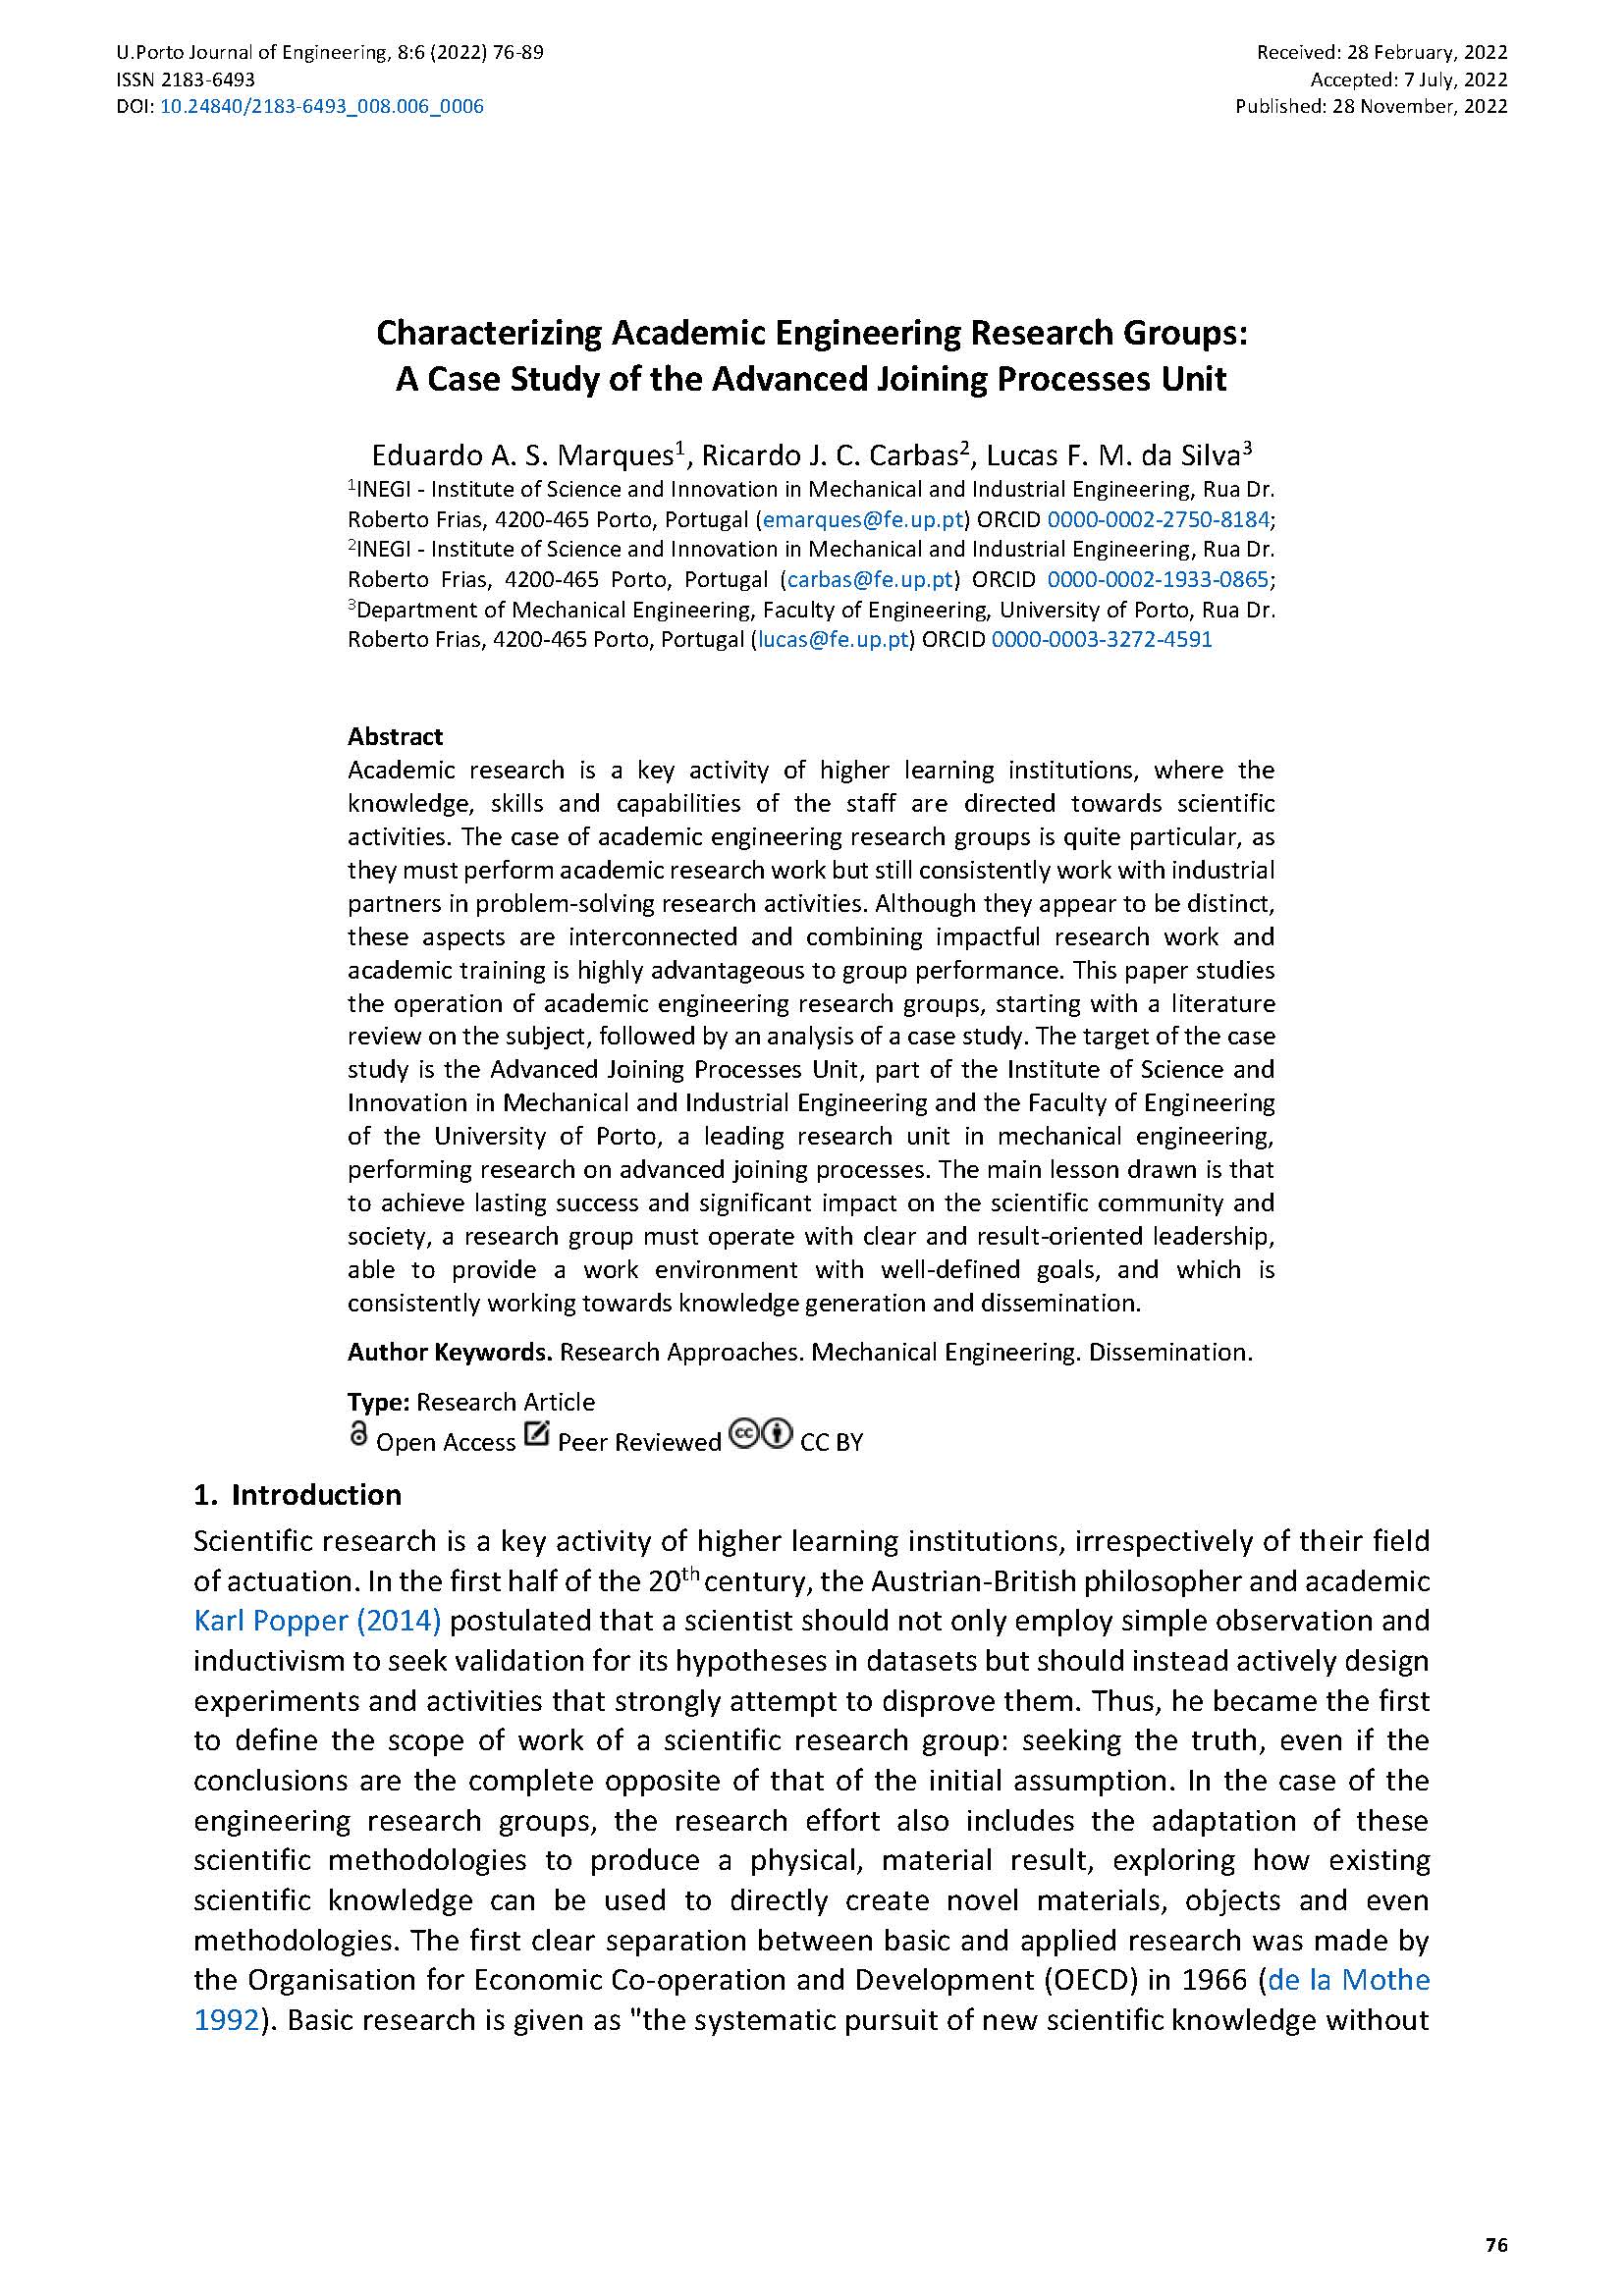 Characterizing Academic Engineering Research Groups: A Case Study of the Advanced Joining Processes Unit